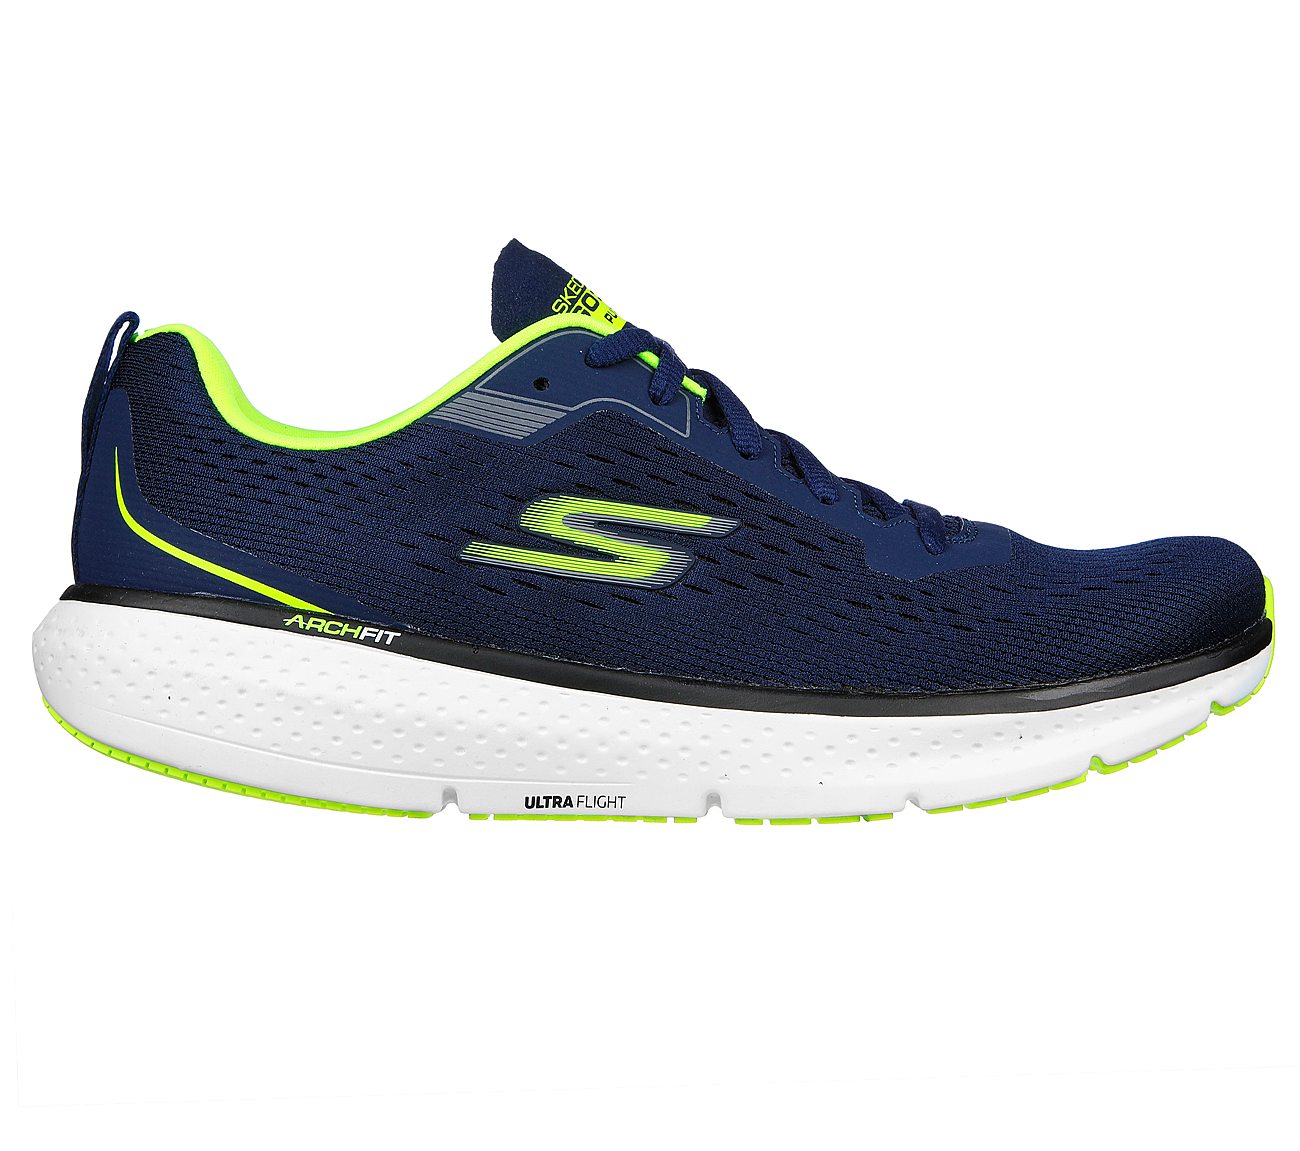 GO RUN PURE 3, NAVY/YELLOW Footwear Lateral View